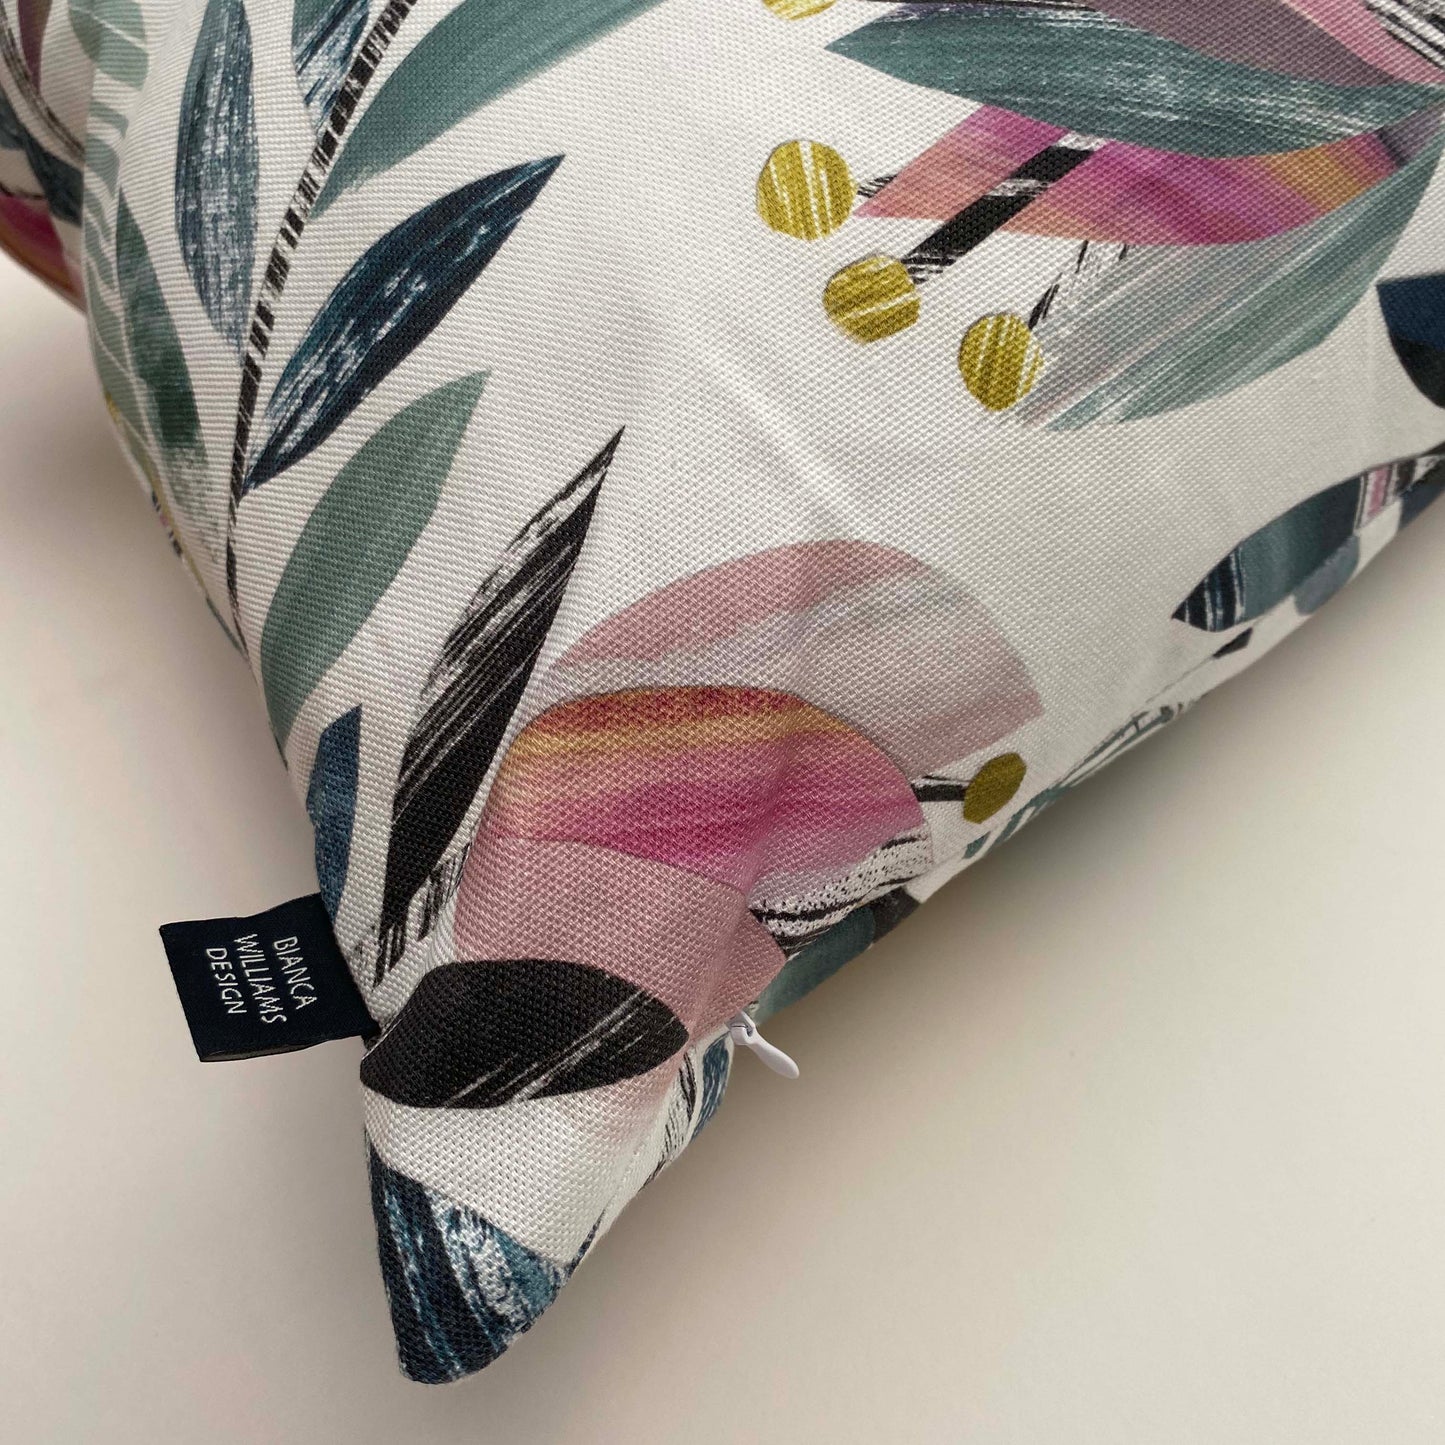 A close up of the corner of the Tulip Cushion, showing the concealed zip and Bianca Williams Design Brand Label sewn into the edges.